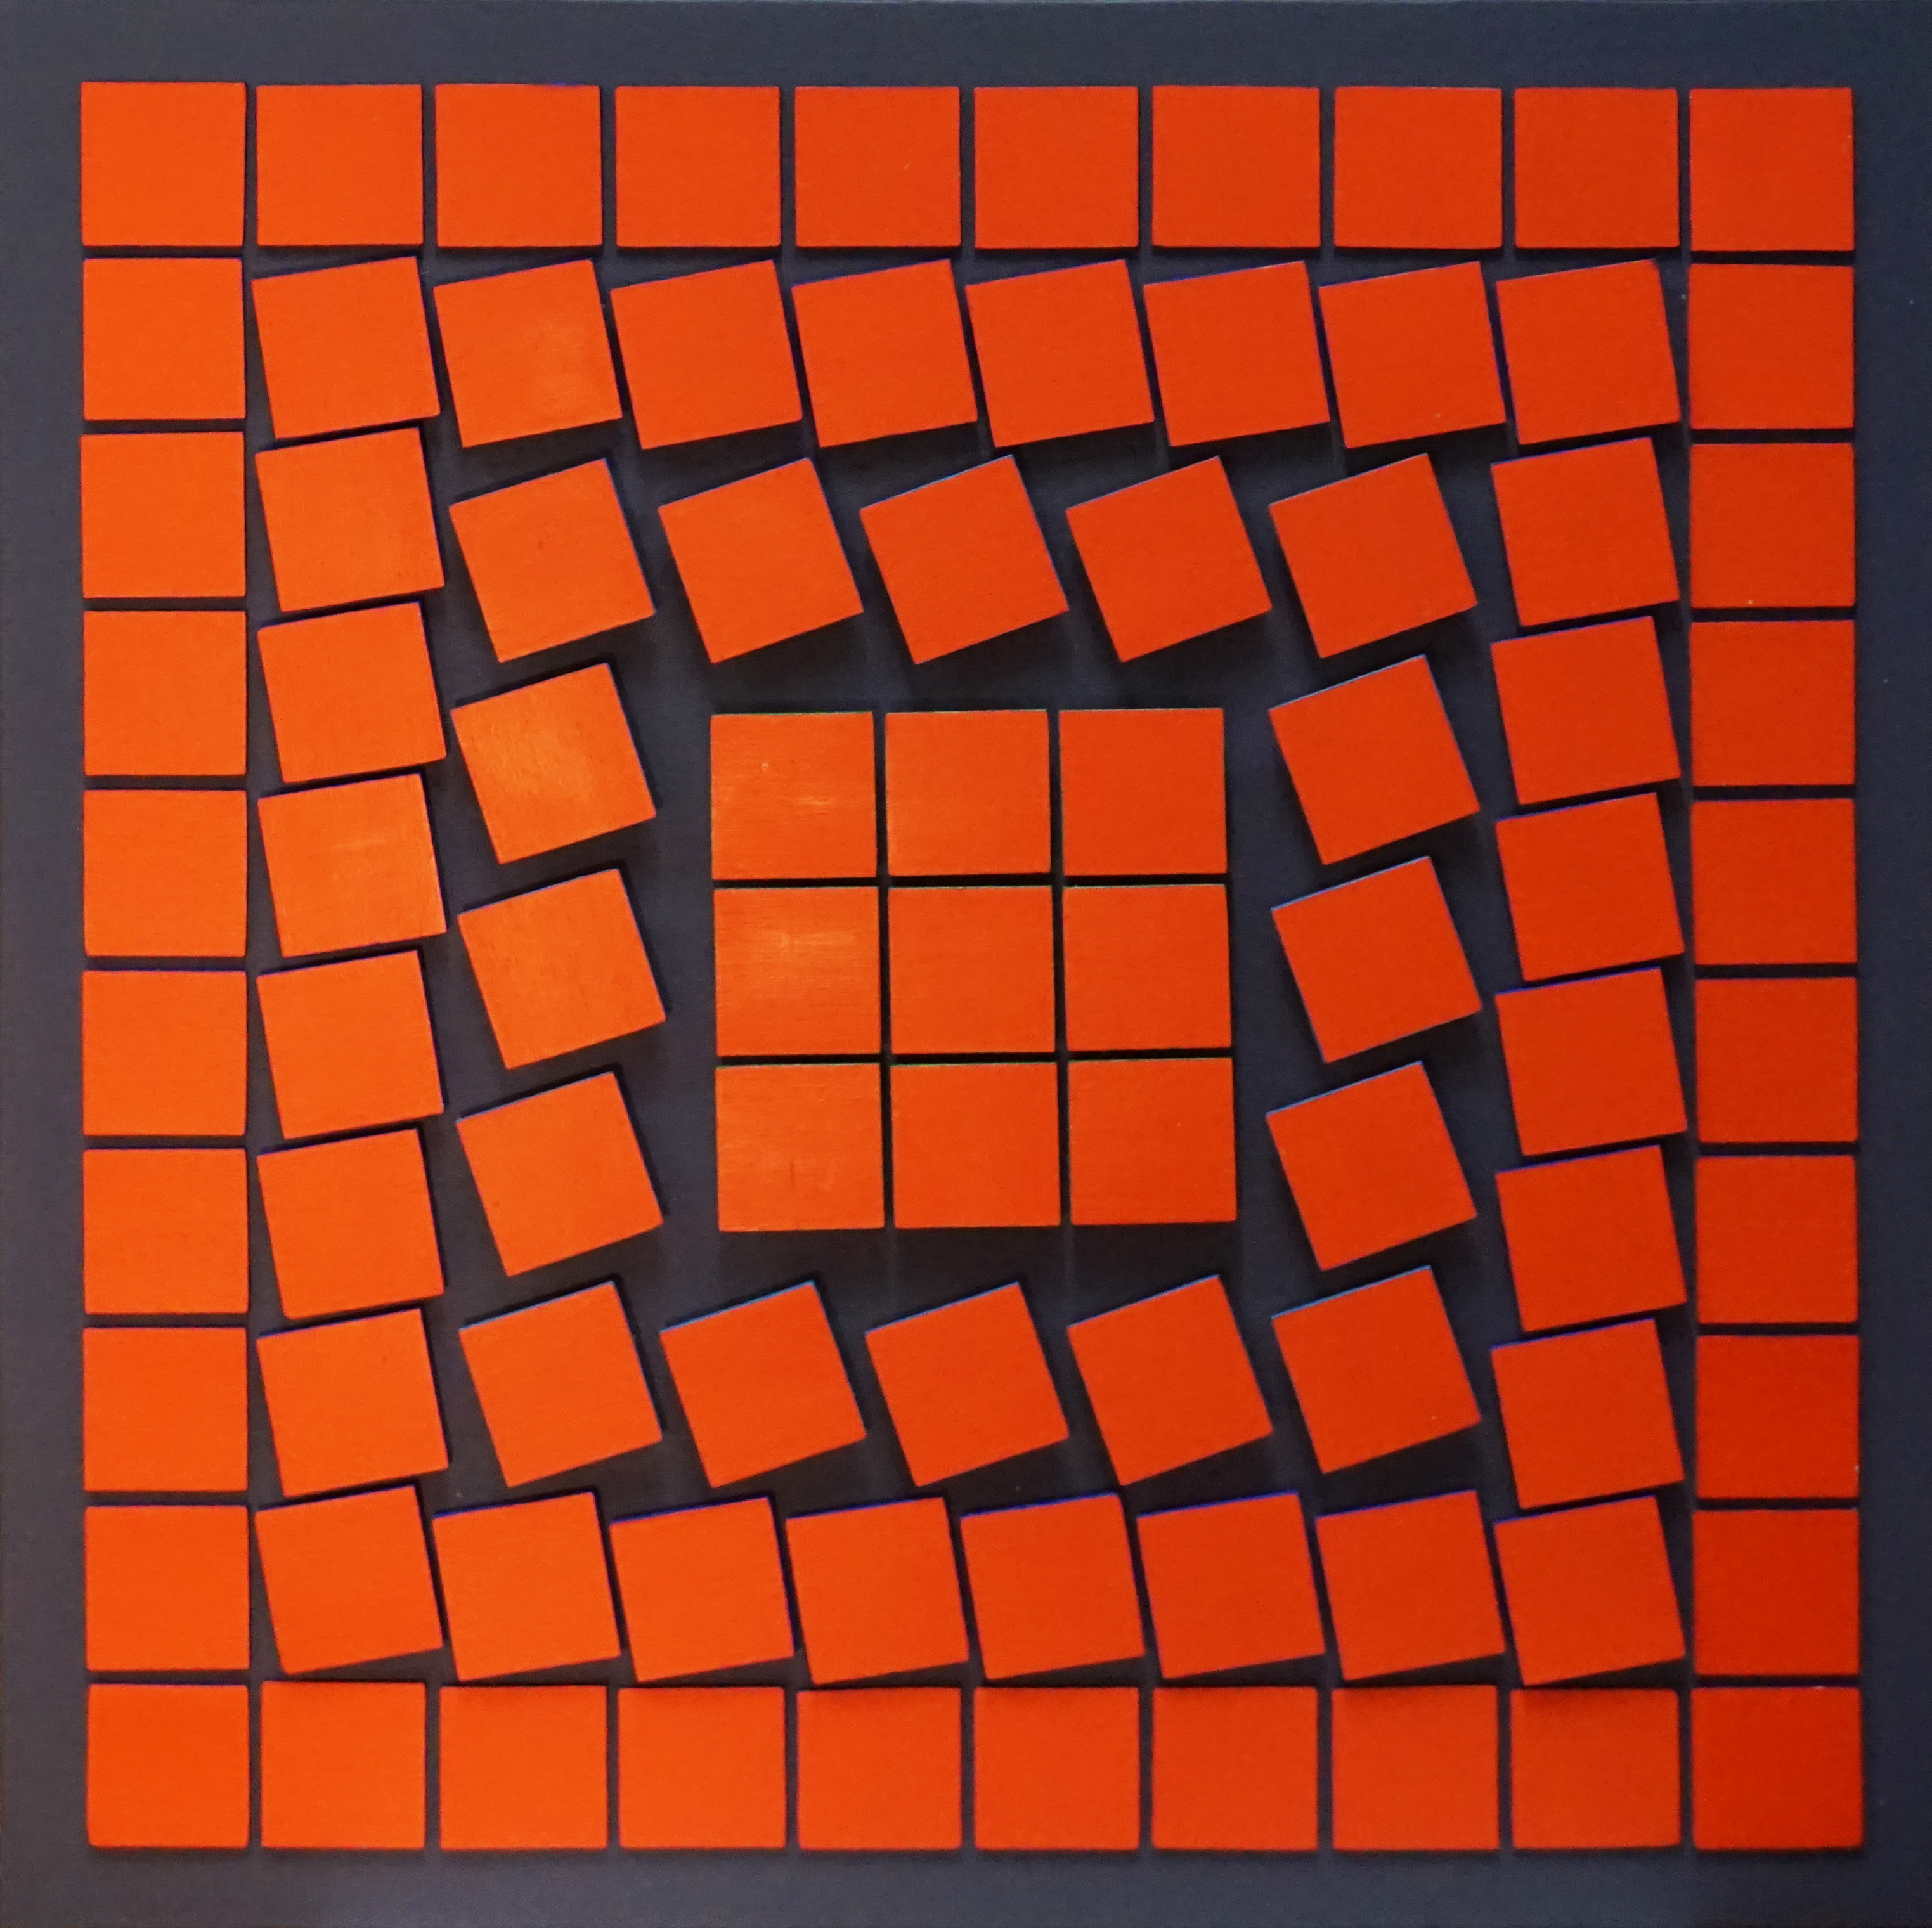 “Square Dancing”, 1983, 24x24x3”, relief